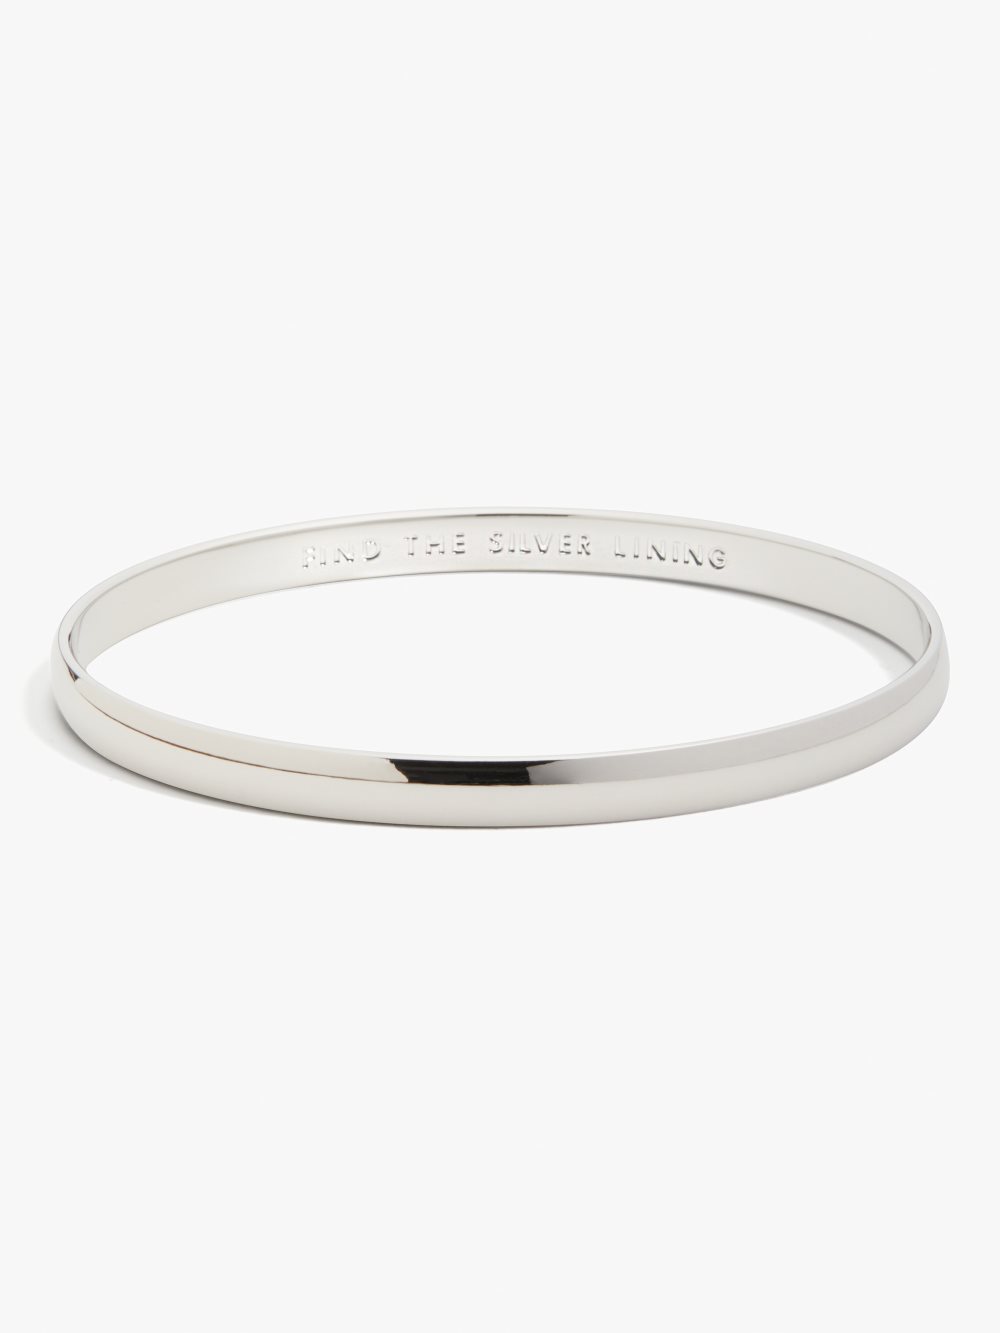 Women's silver find the silver lining idiom bangle | Kate Spade